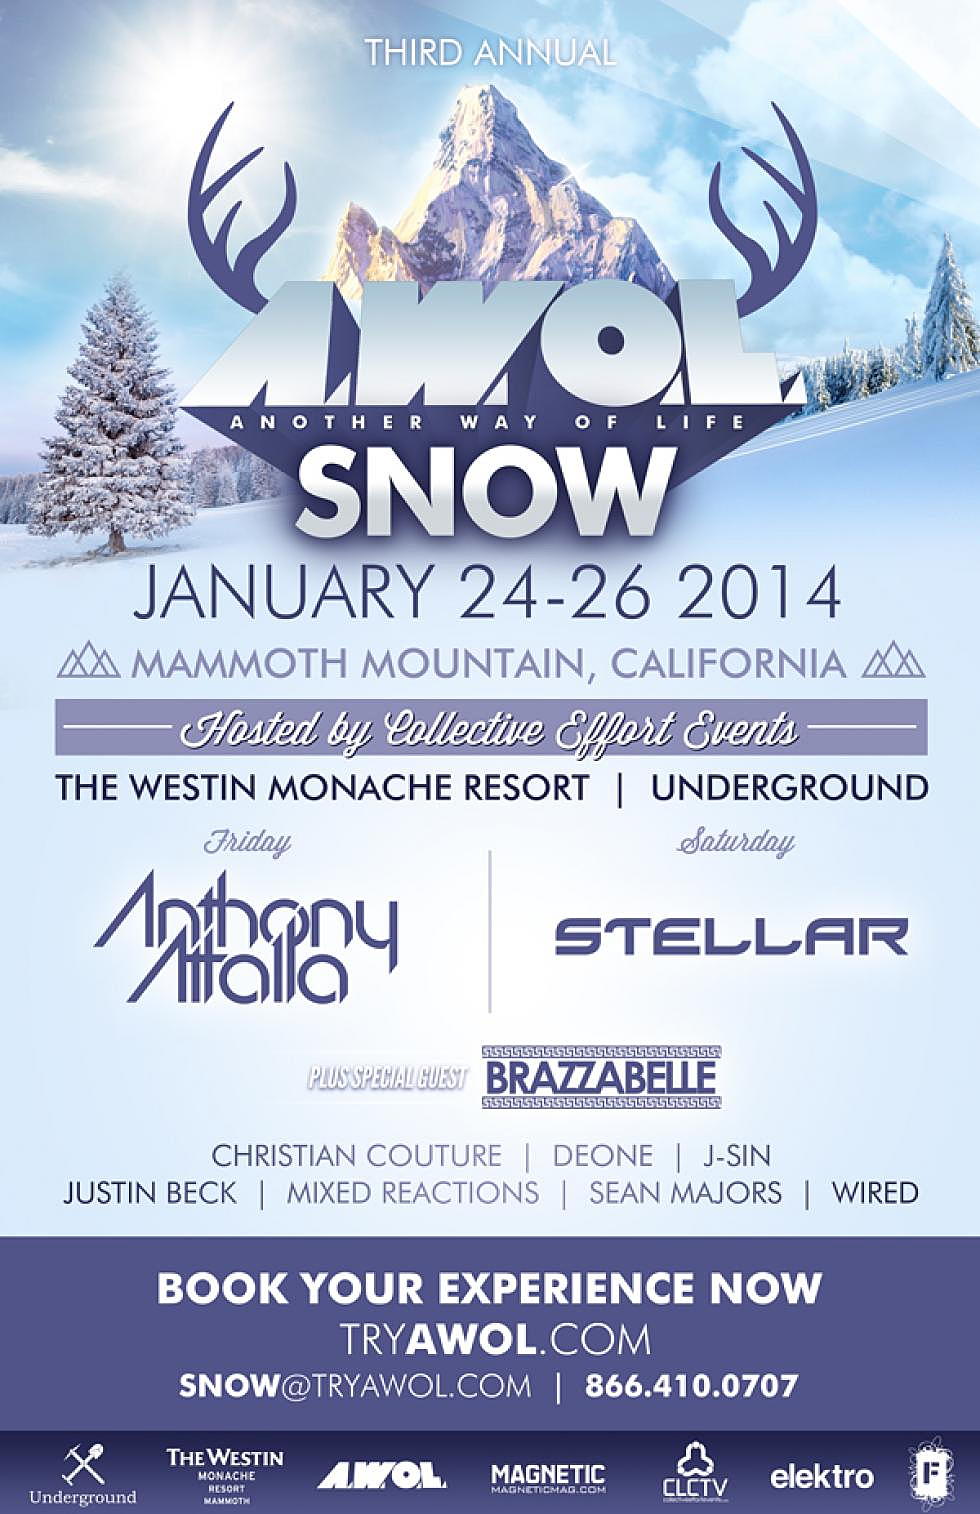 Anthony attalla &#038; Stellar hit the slopes at AWOL SNOW + Giveaway!